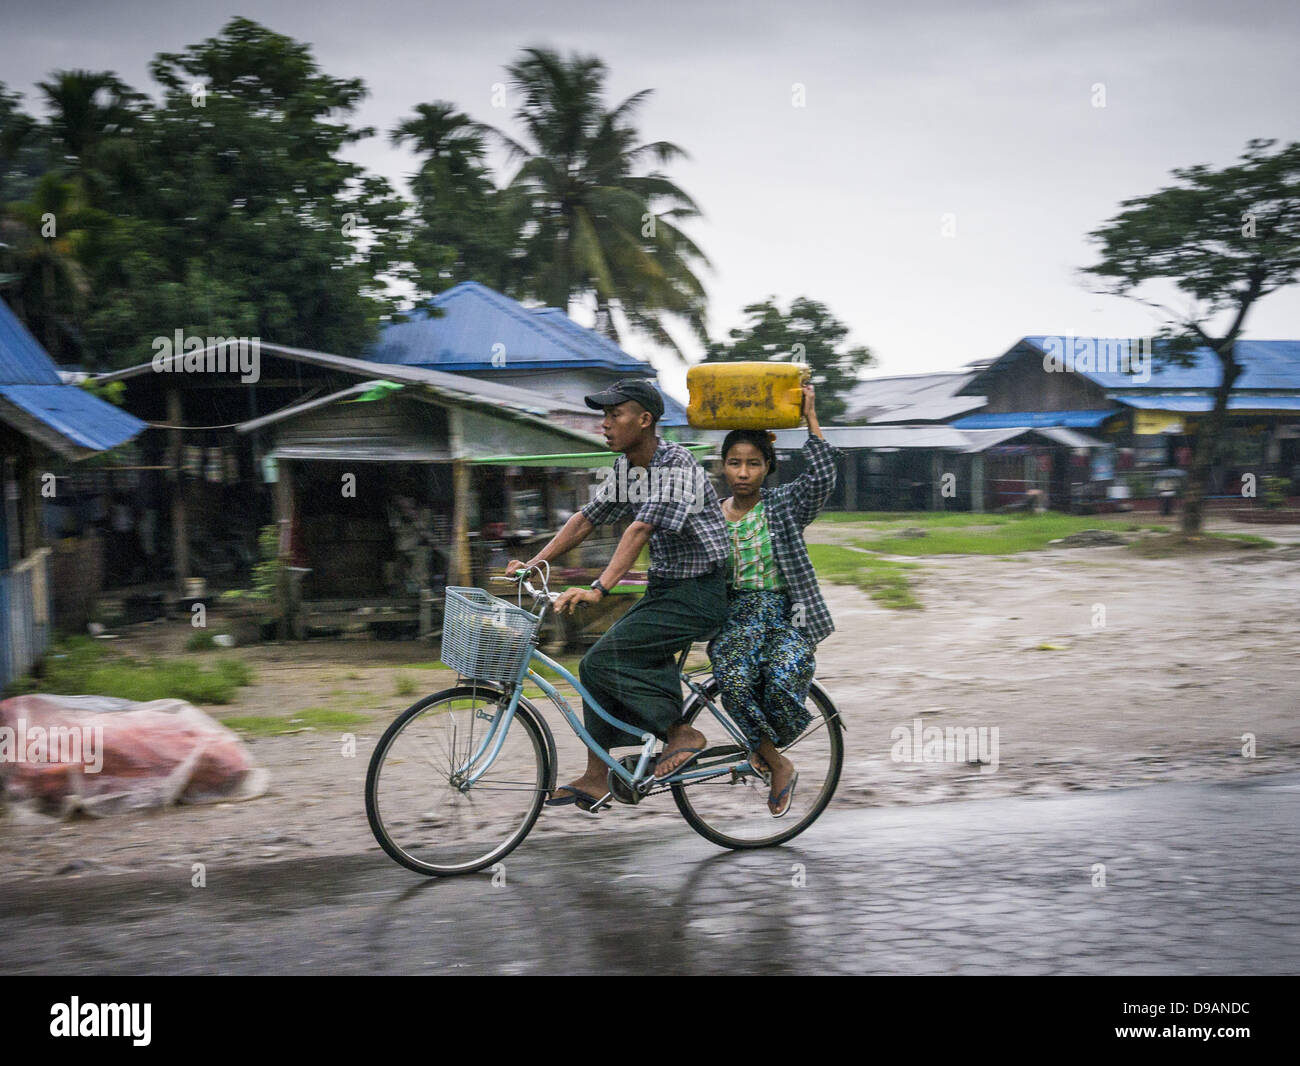 June 14, 2013 - Samalauk, Ayeyarwady, Union of Myanmar - A couple rides a bicycle through the rain along Highway 5 in Samalauk, Ayeyarwady, in the Irrawaddy delta region of Myanmar. This region of Myanmar was devastated by cyclone Nargis in 2008 but daily life has resumed and it is now a leading rice producing region. (Credit Image: © Jack Kurtz/ZUMAPRESS.com) Stock Photo